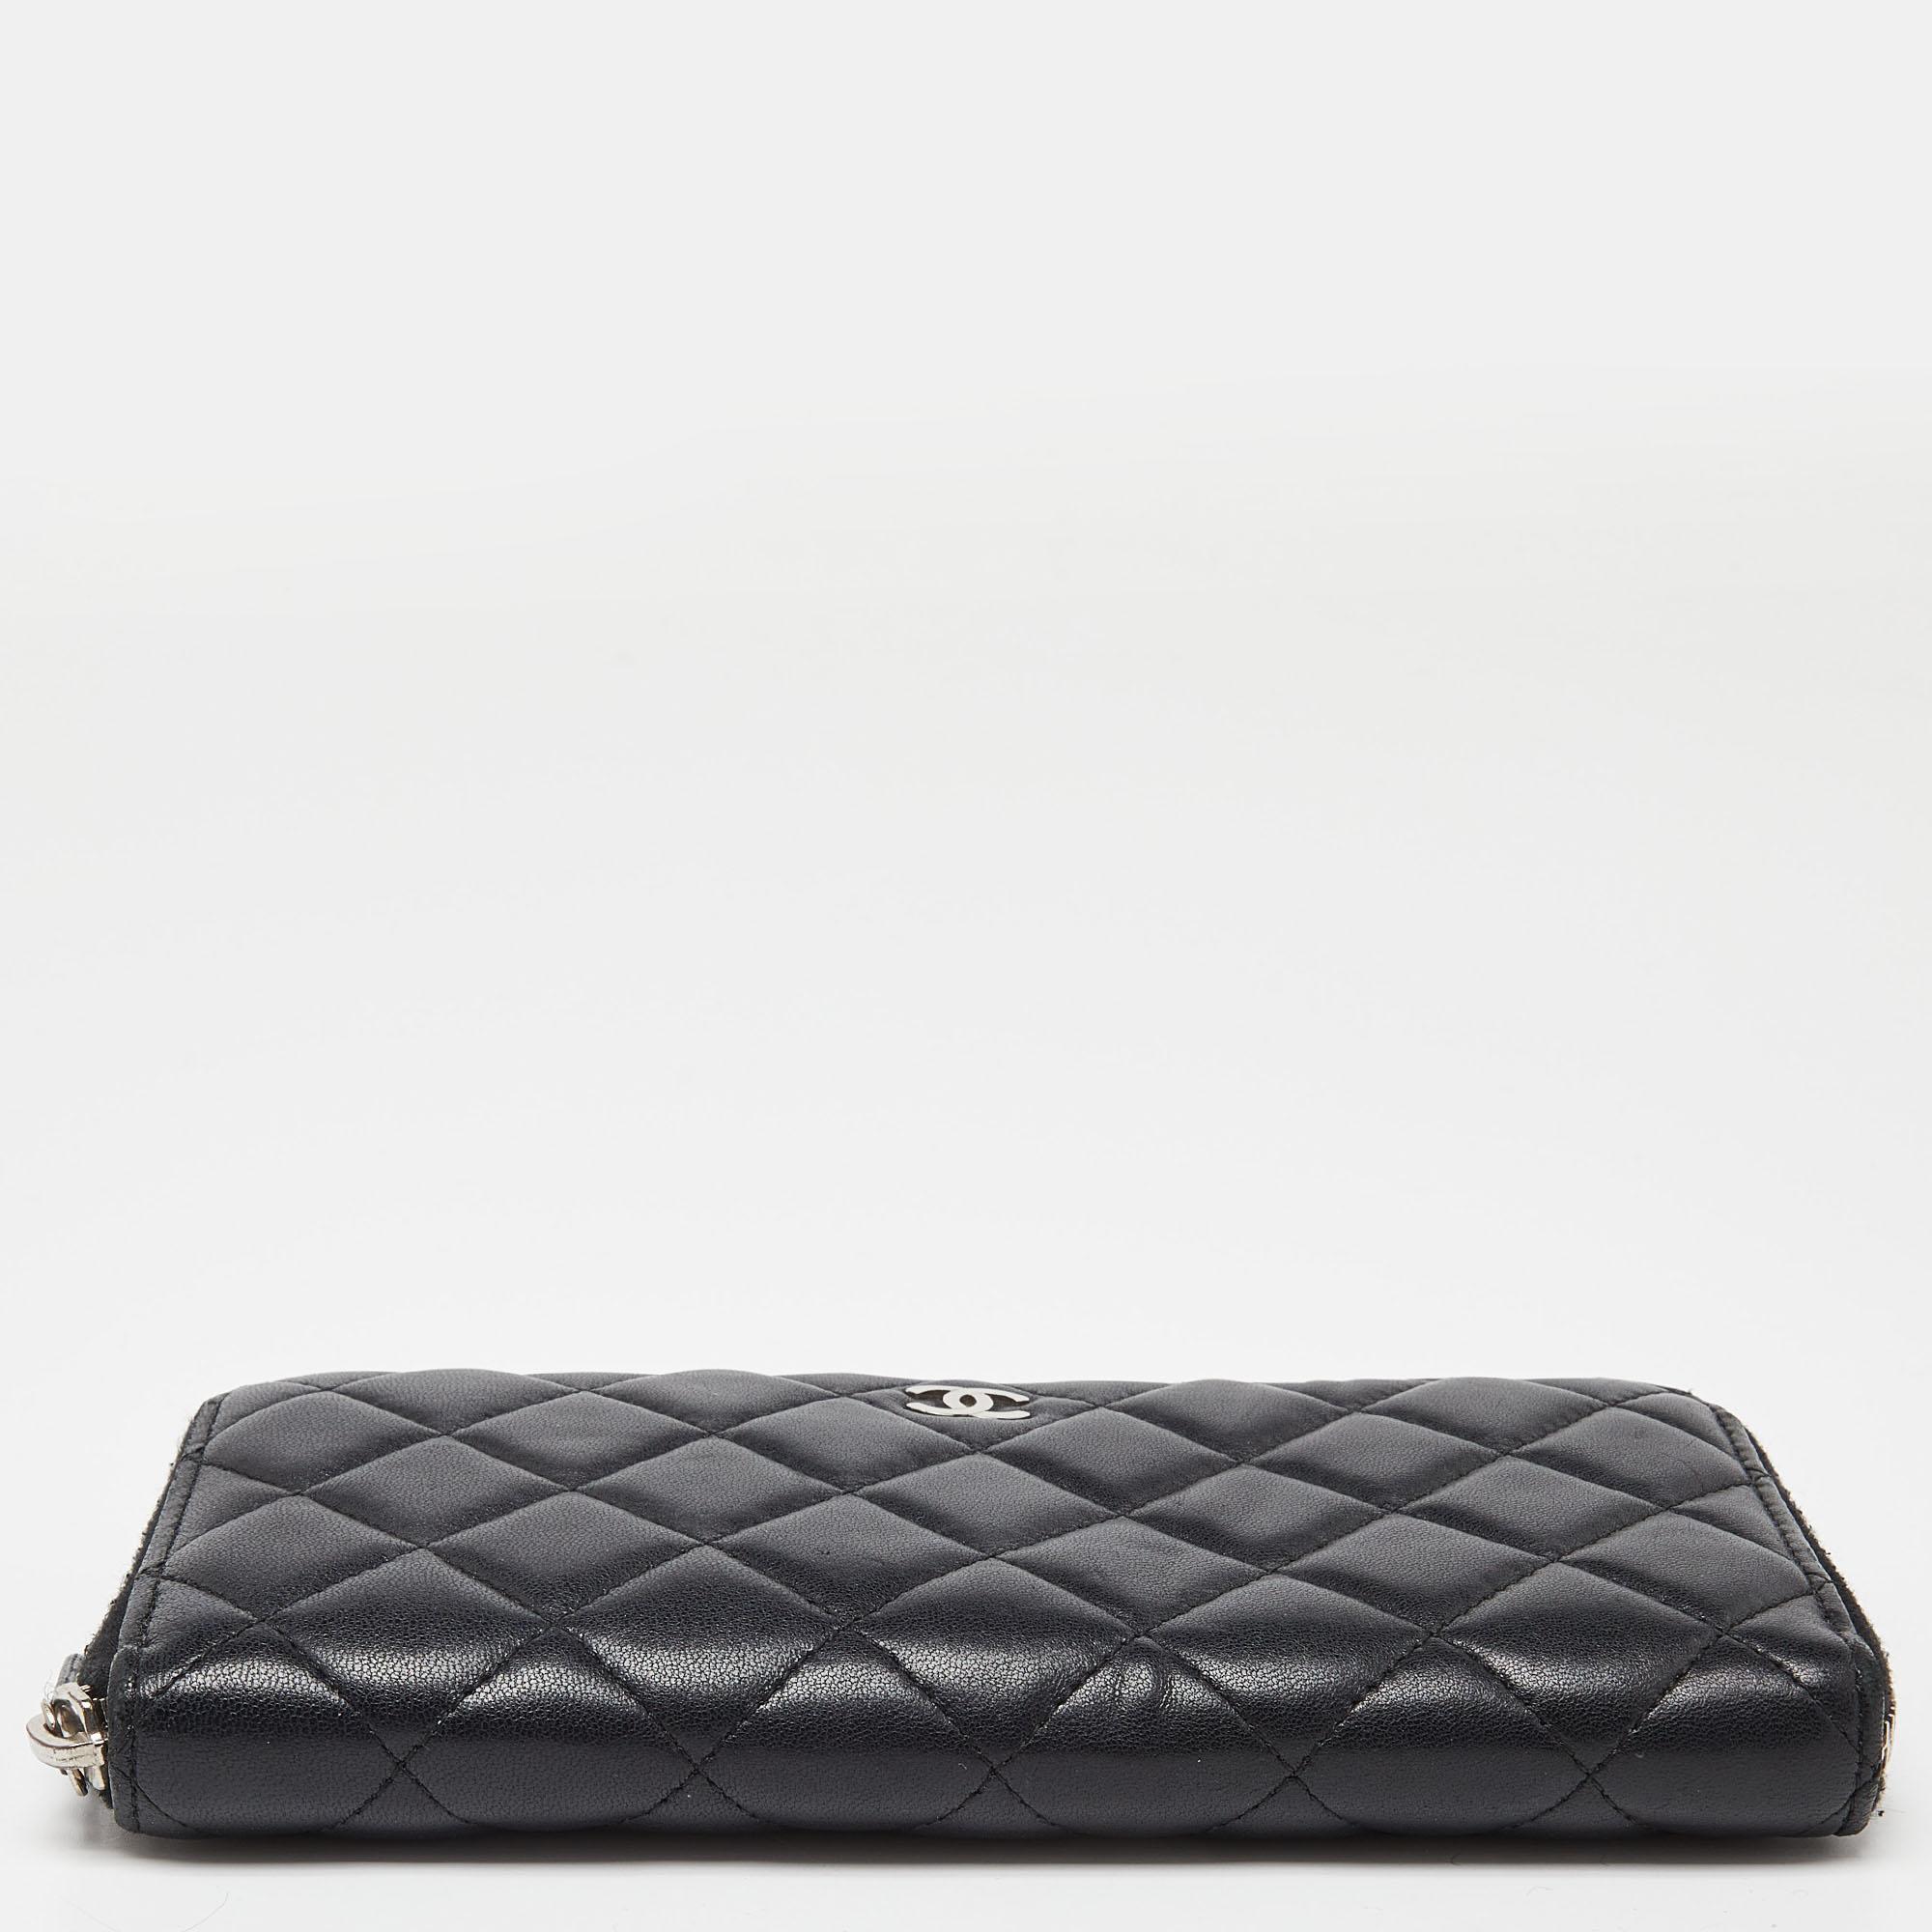 Chanel Black Quilted Leather CC Zip Around Wallet For Sale 4